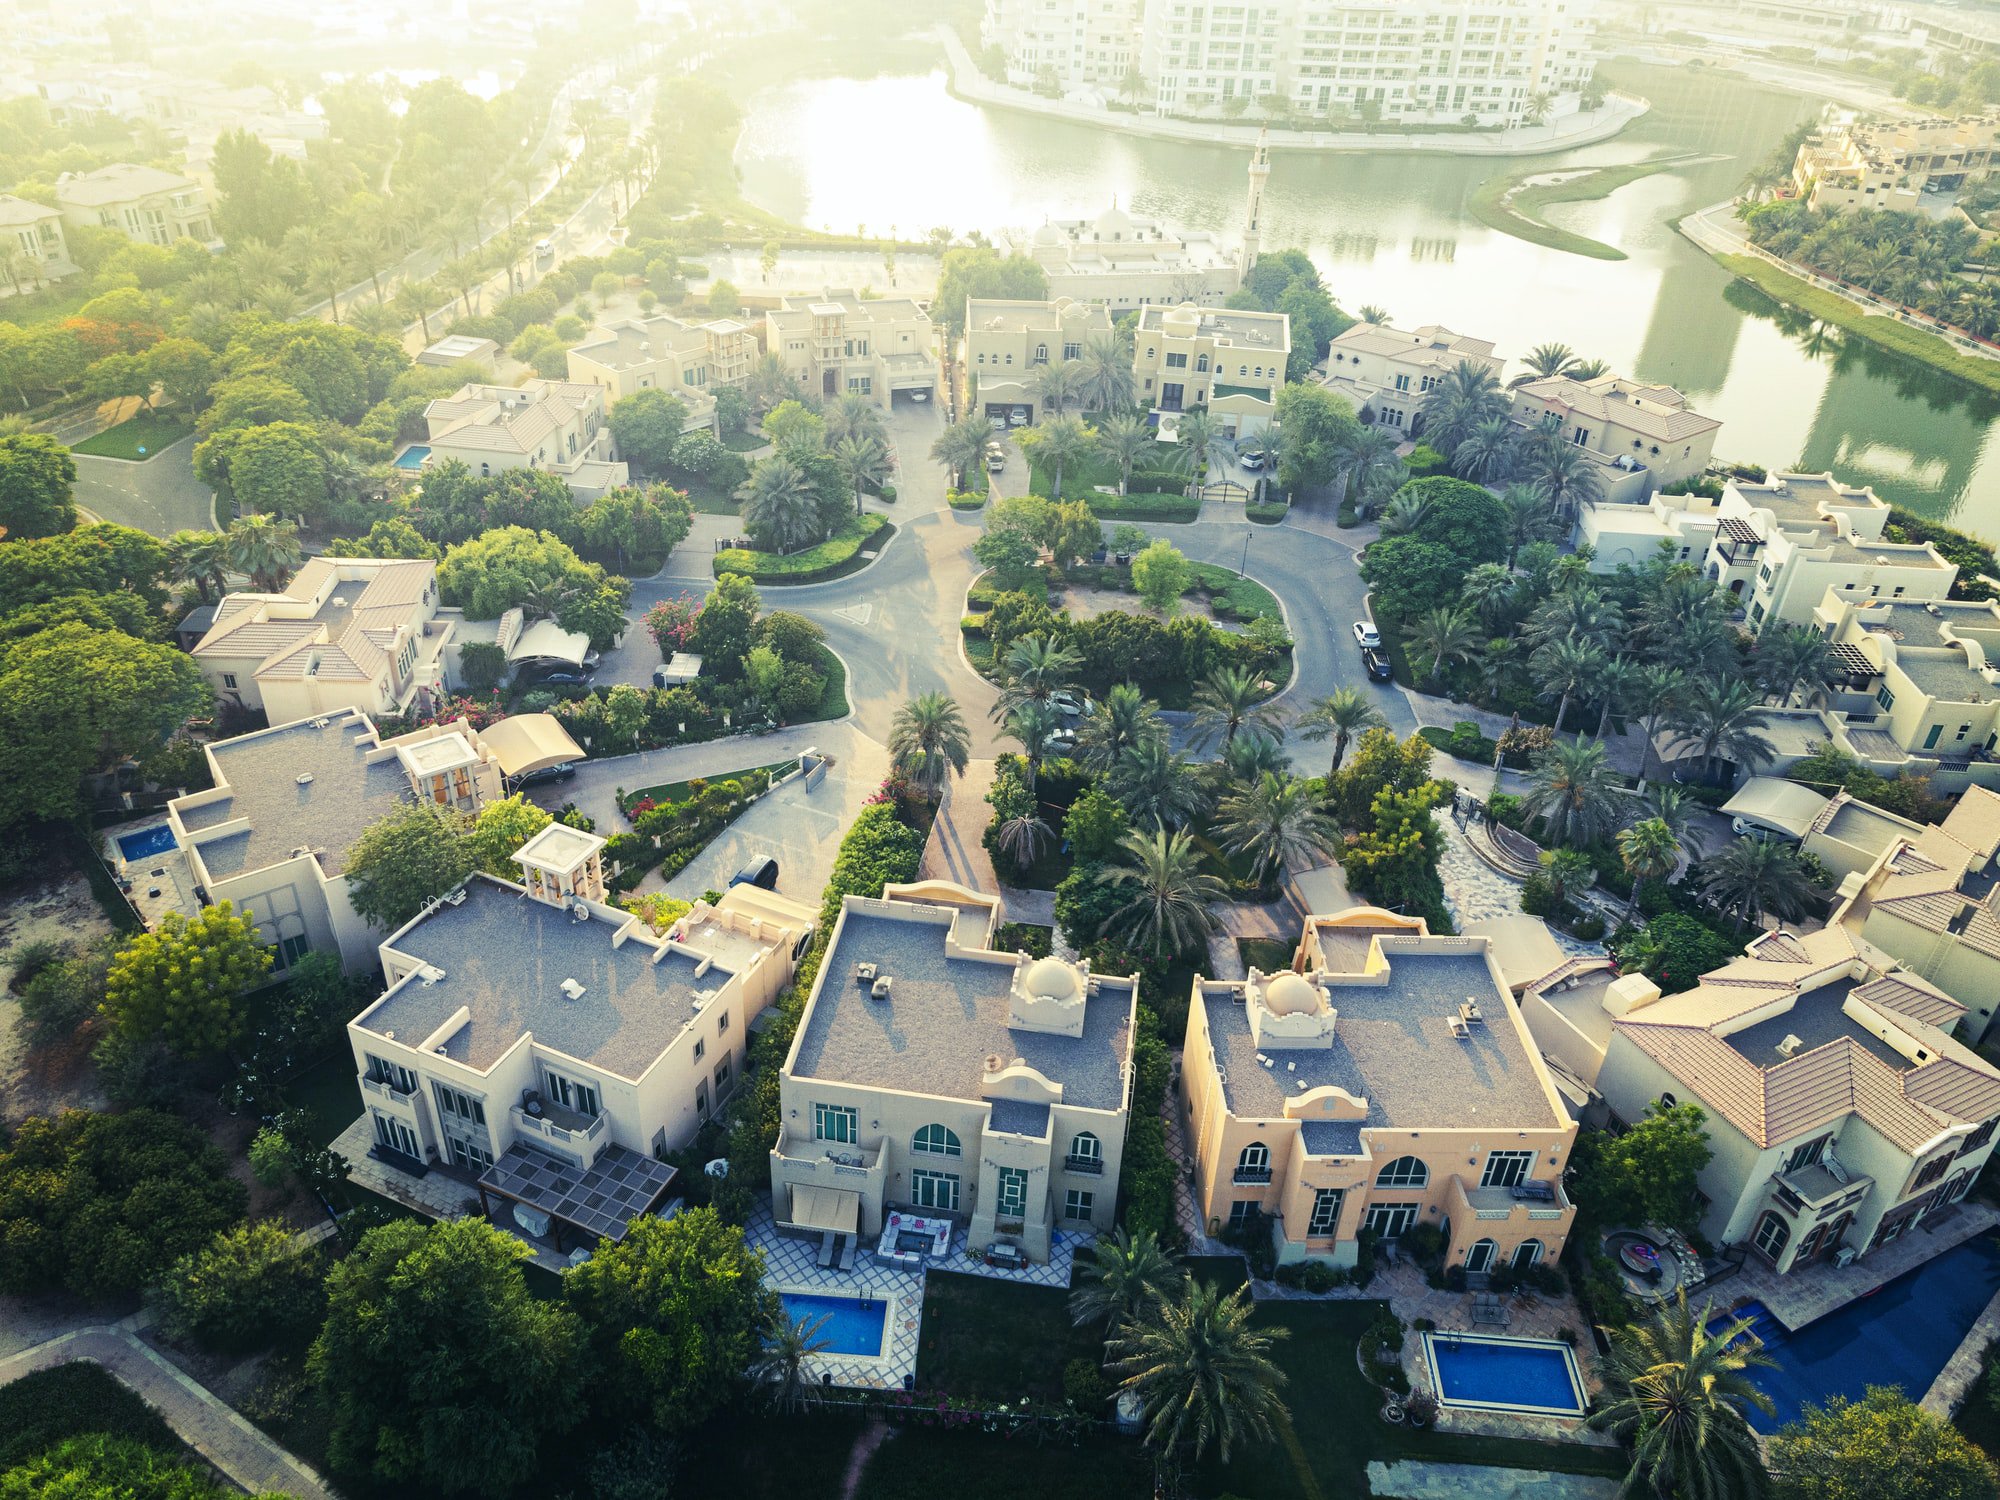 Significant Factors that Will Benefit the Dubai Real Estate Market